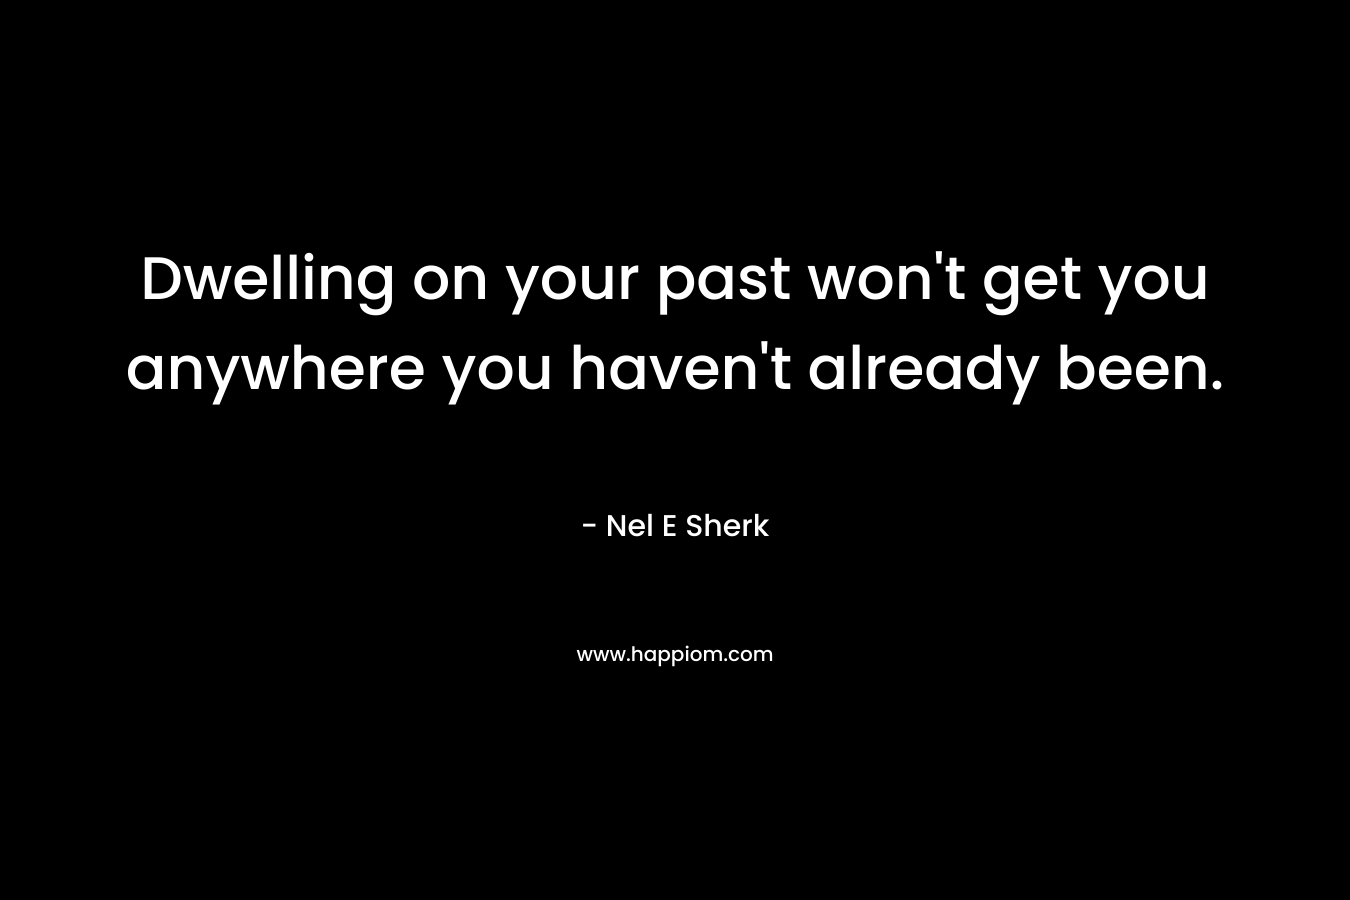 Dwelling on your past won’t get you anywhere you haven’t already been. – Nel E Sherk